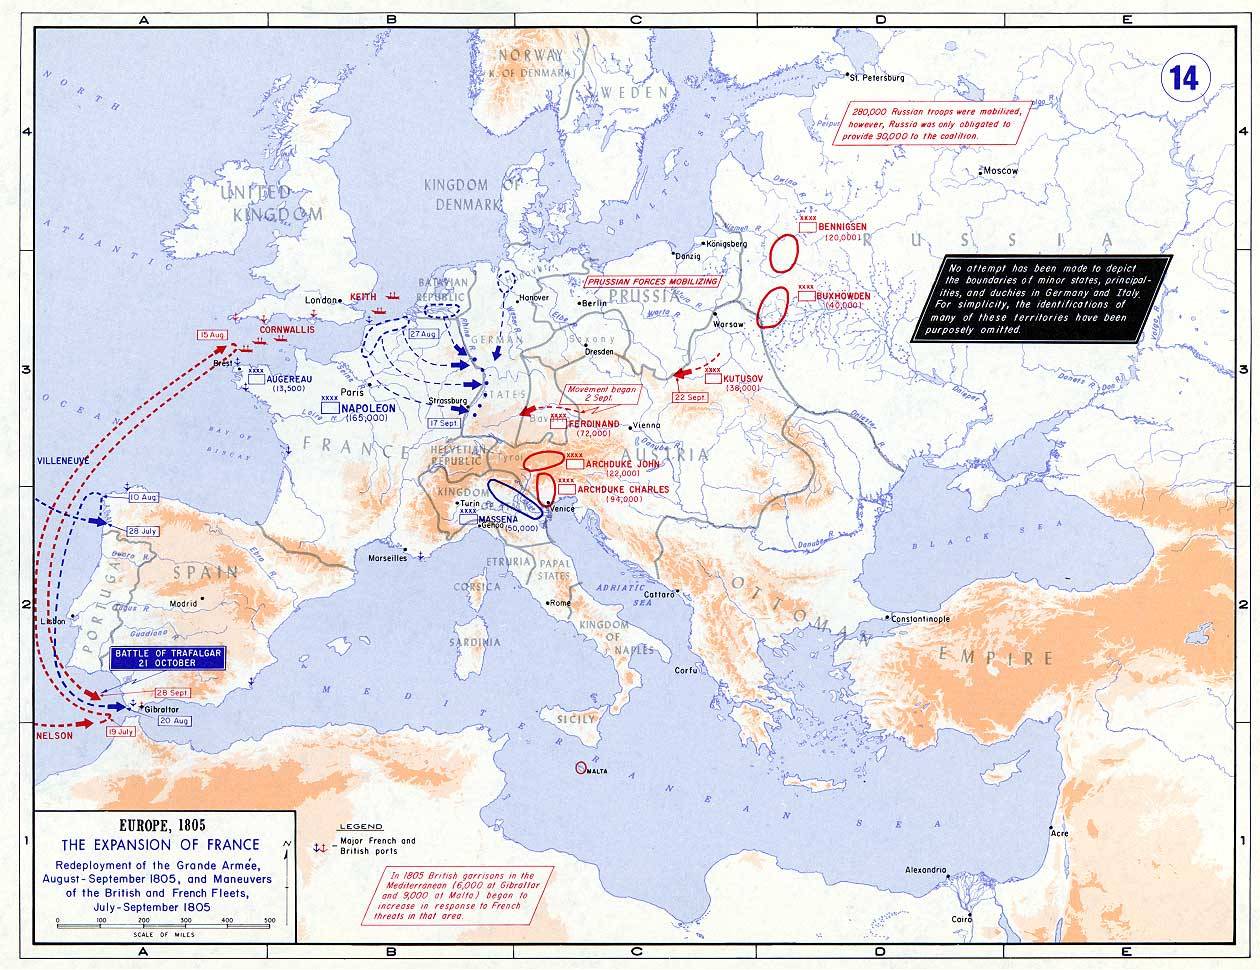 Strategic map of Europe 1805 before Battle of... - Maps on the Web